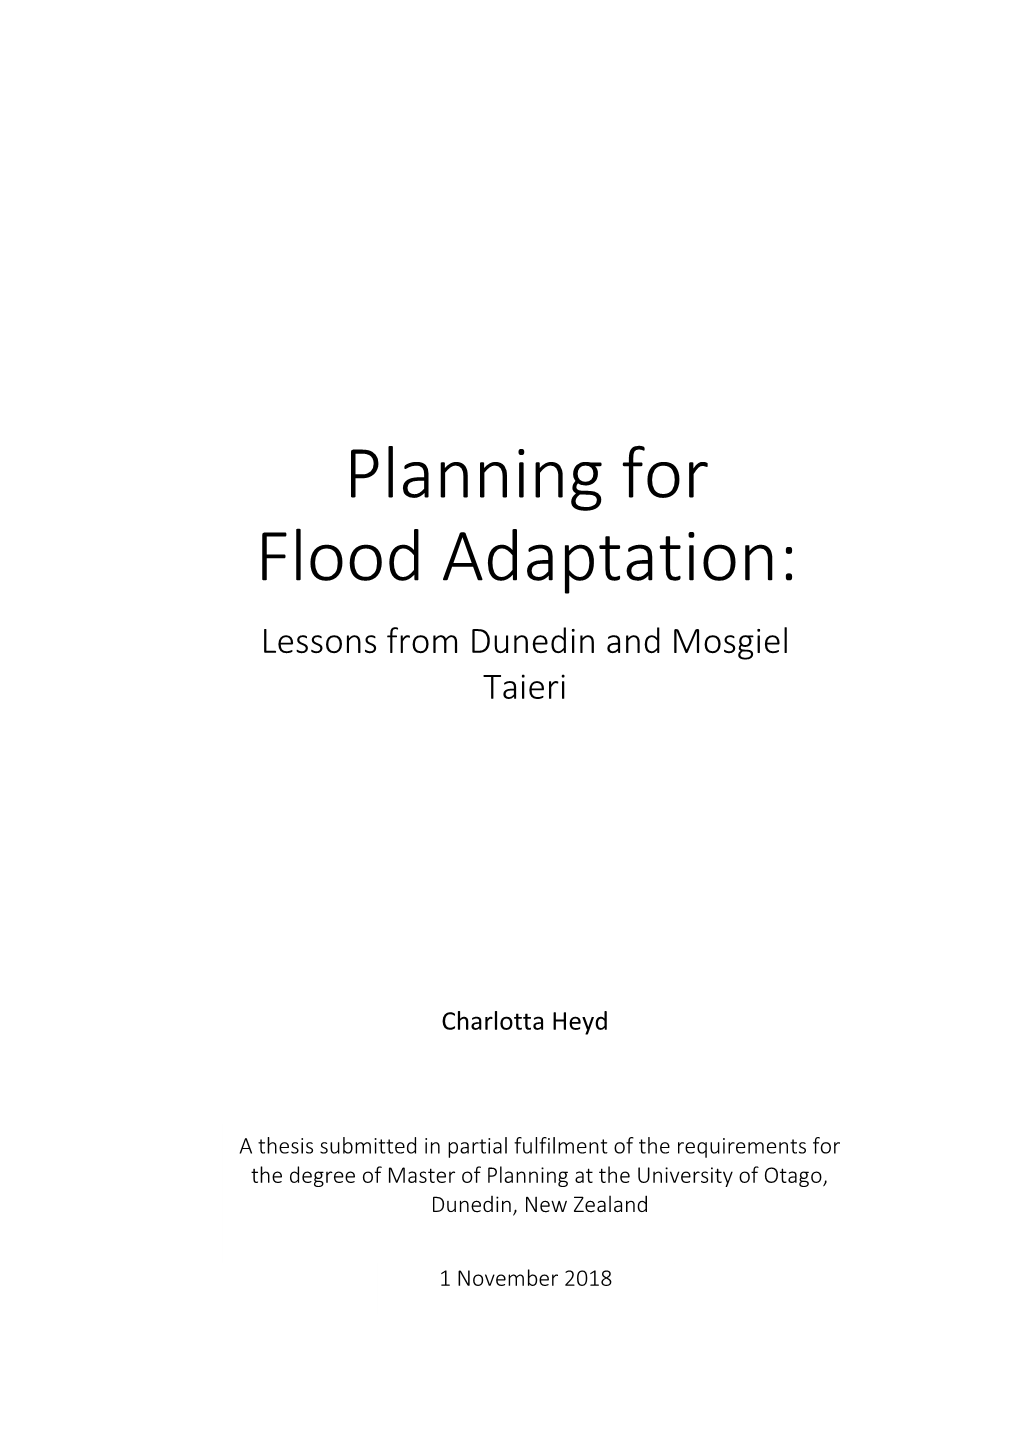 Planning for Flood Adaptation: Lessons from Dunedin and Mosgiel Taieri